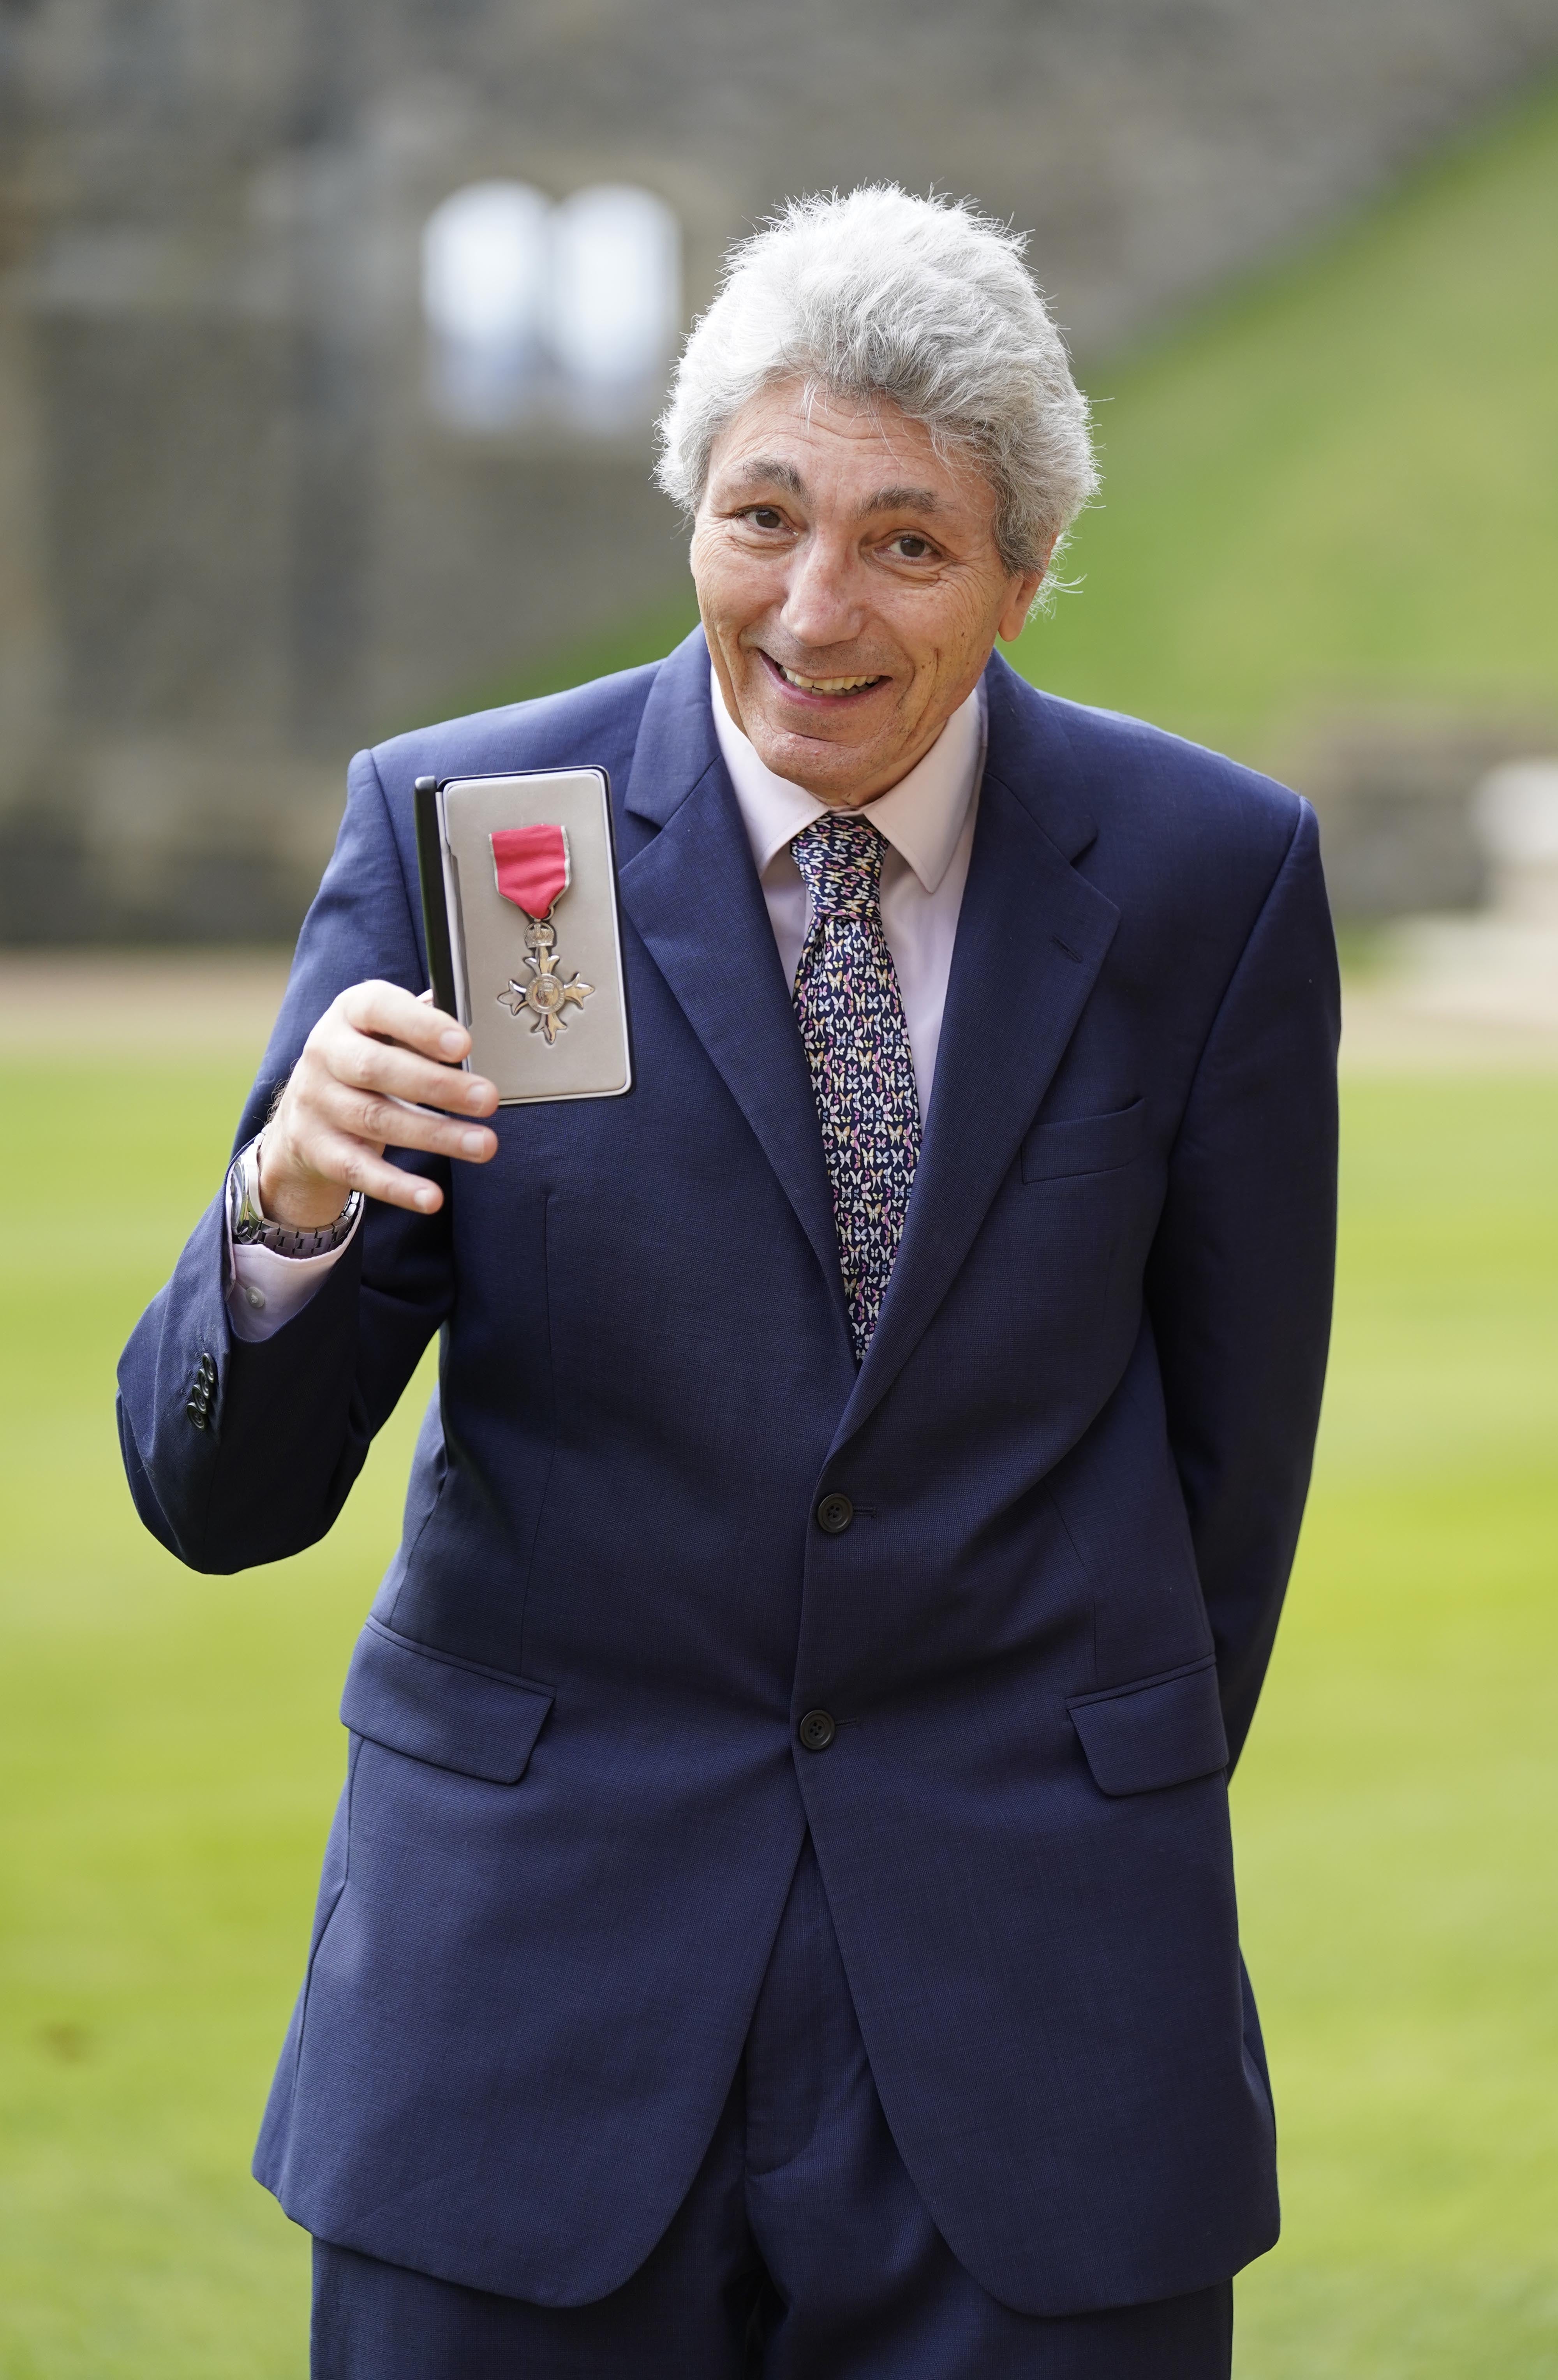 Paul Mayhew-Archer after receiving his MBE from the Princess Royal during an investiture ceremony at Windsor Castle (Andrew Matthews/PA)